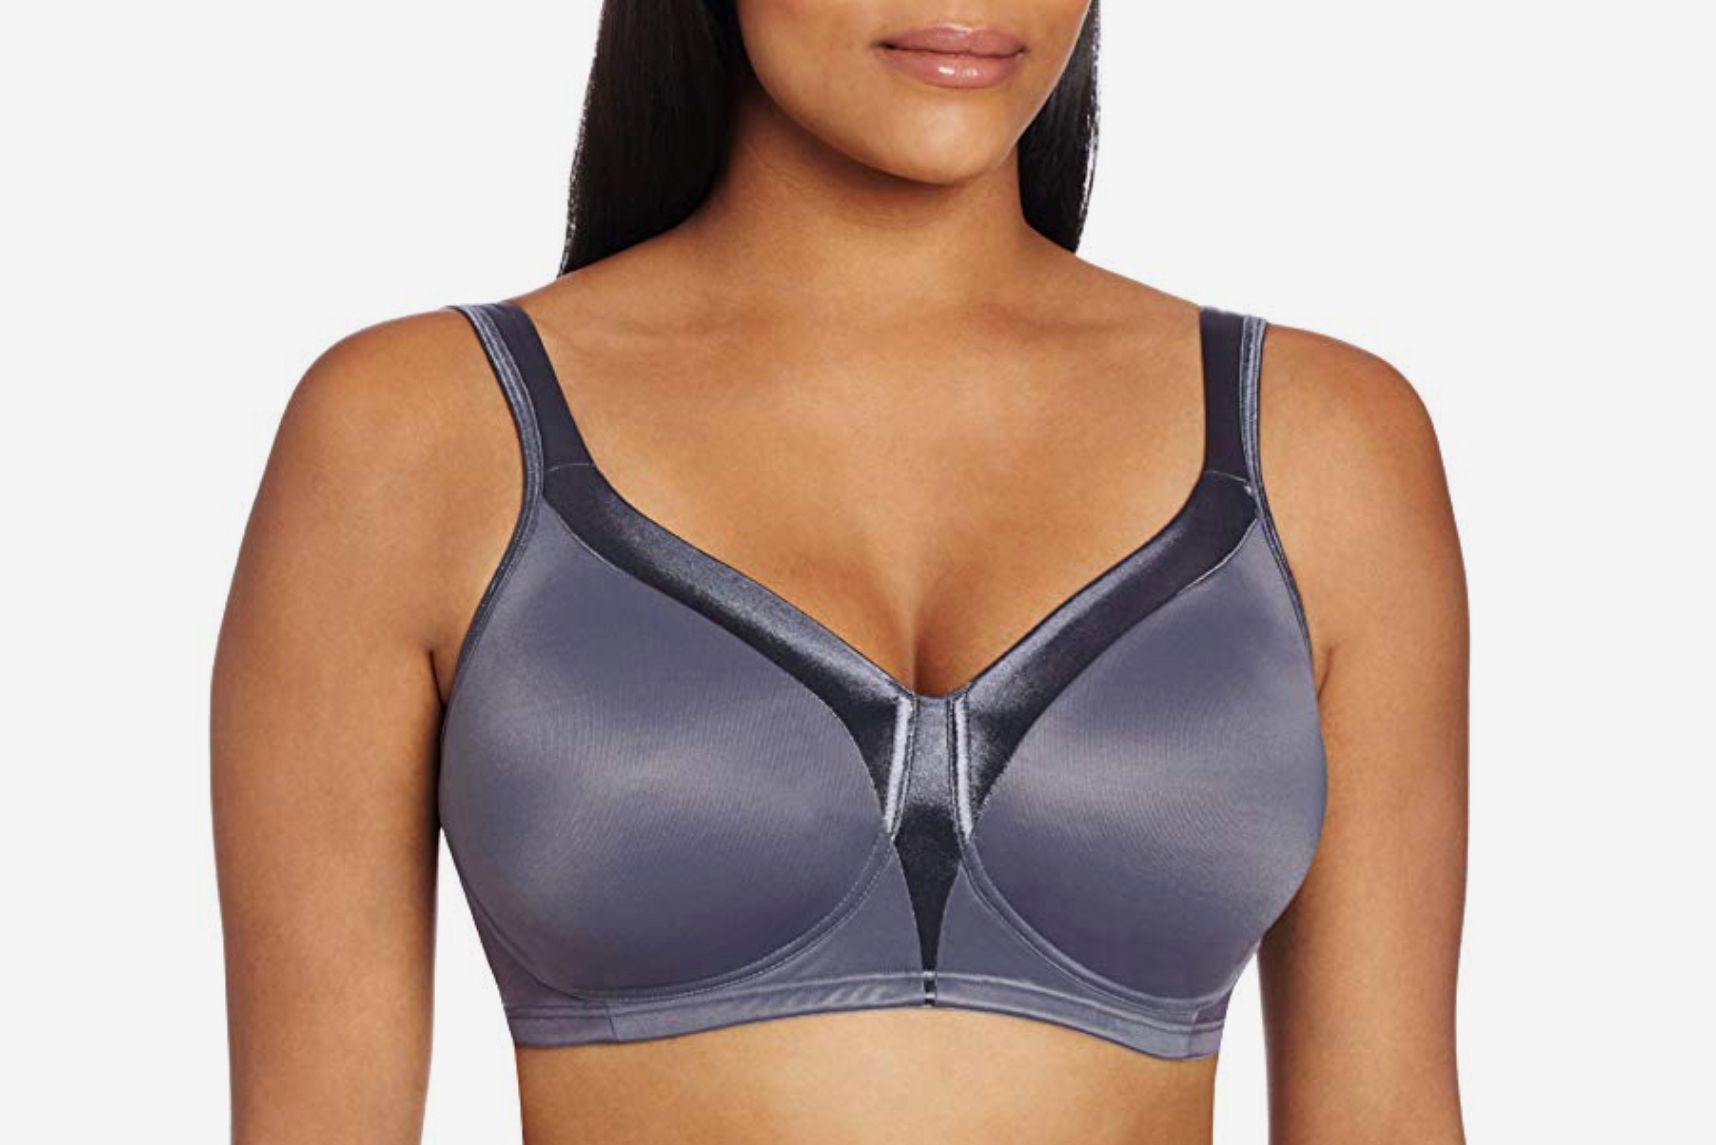 Bra styles for big boobs that make the foundation to every outfit